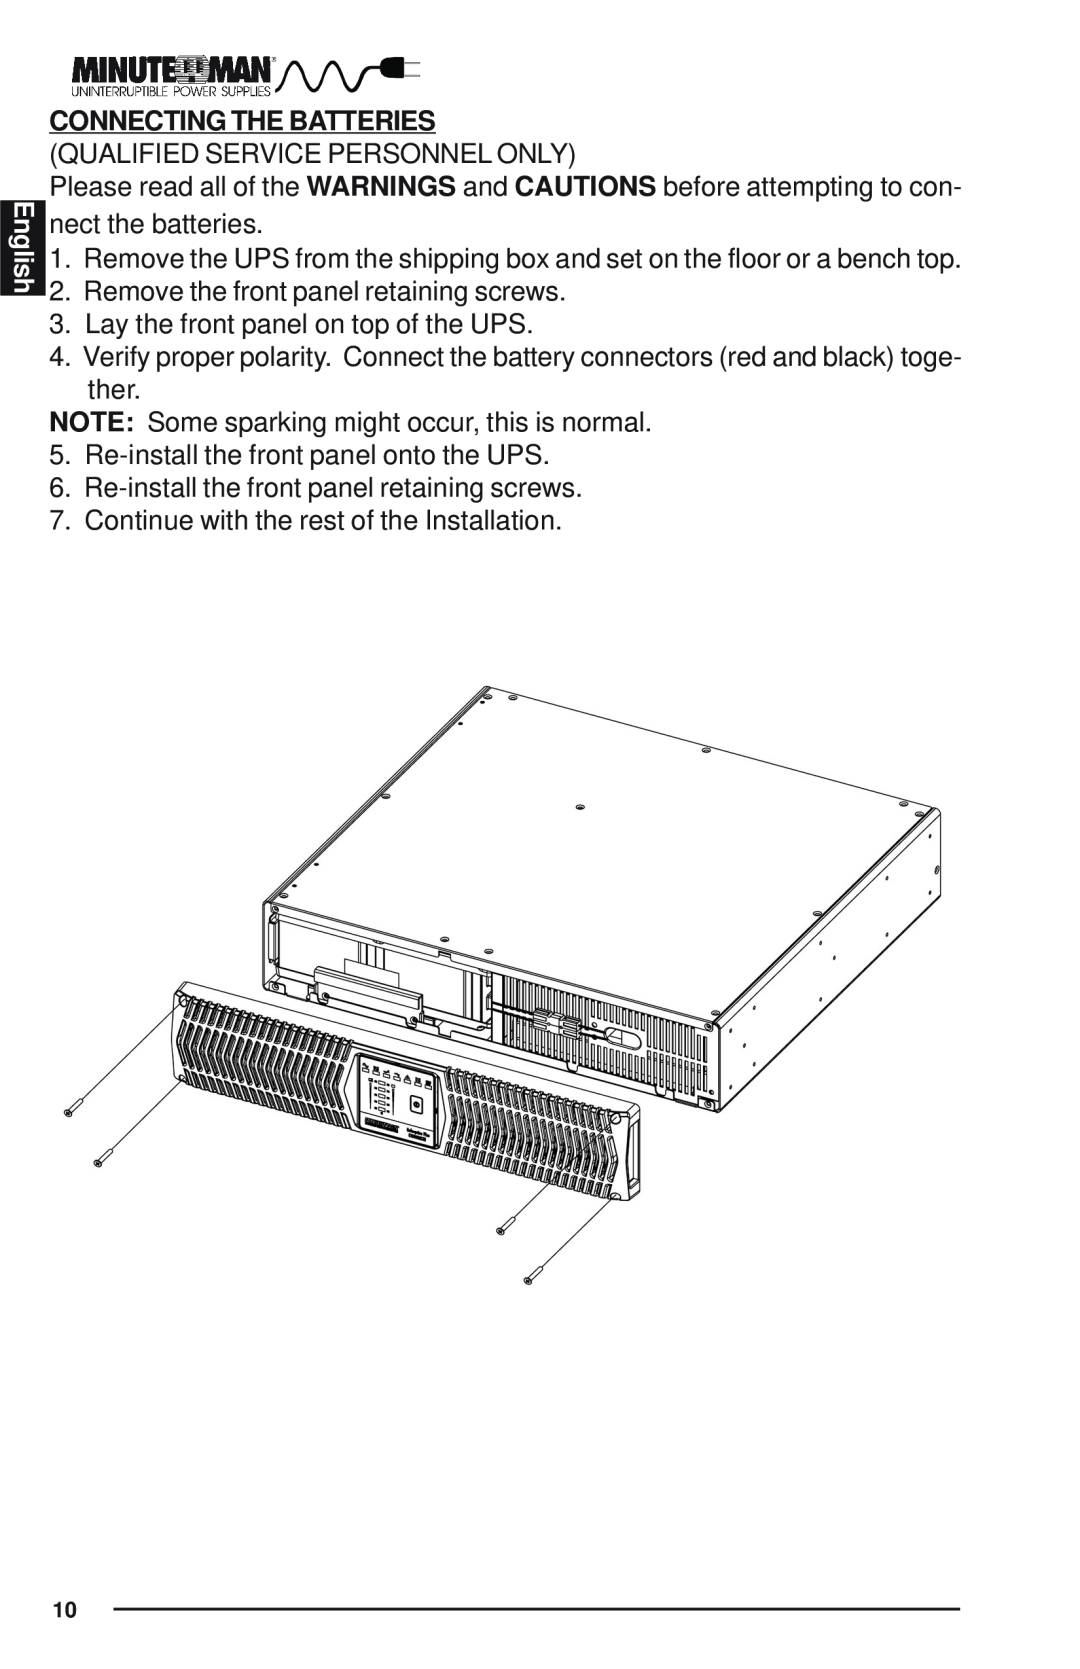 Minuteman UPS Enterprise Plus Series user manual English, Connecting The Batteries Qualified Service Personnel Only 